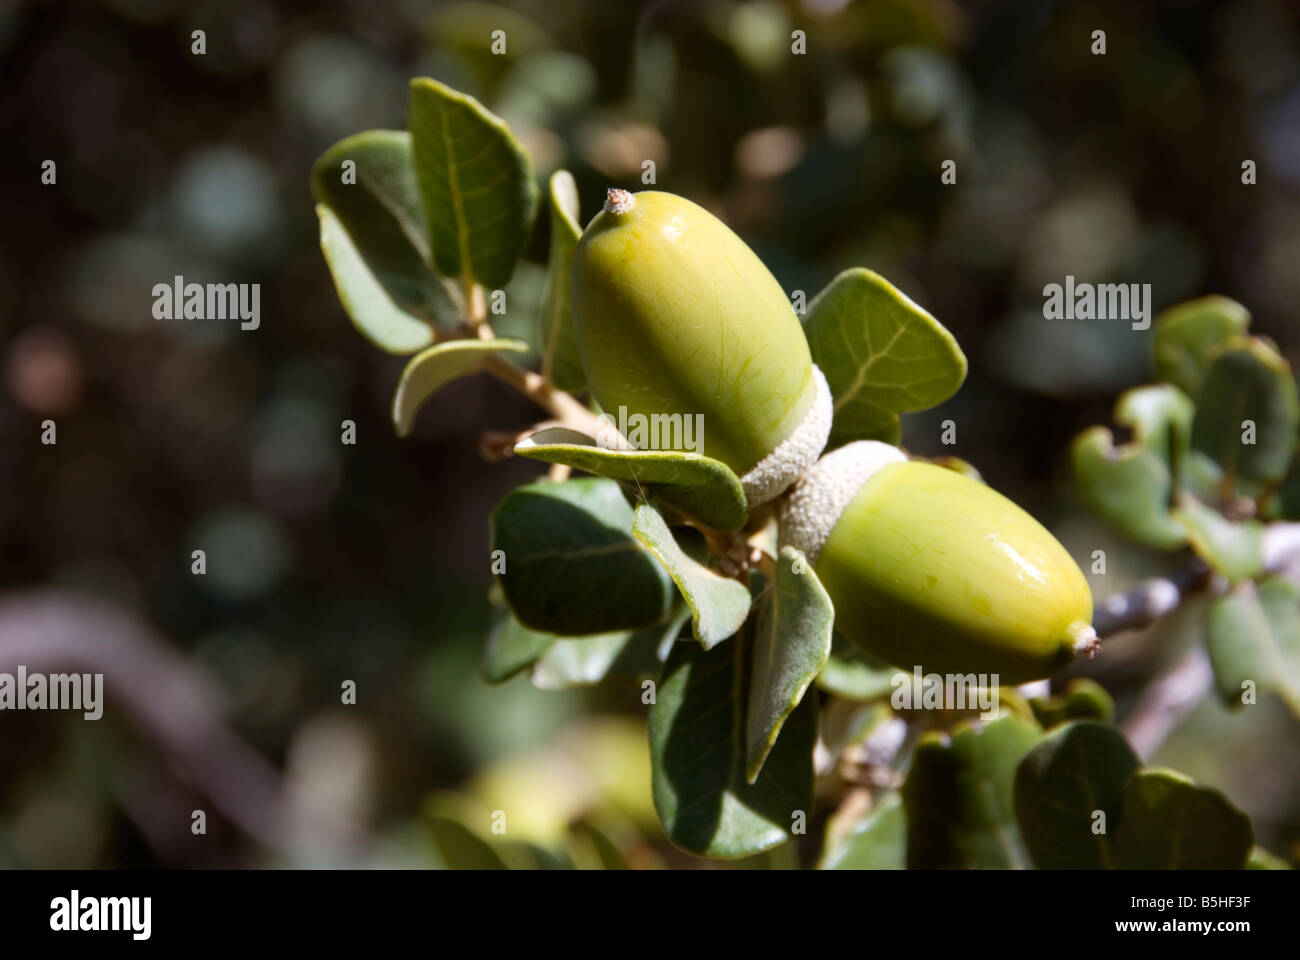 Close up of acorn nut in the Sierra Nevada area of Spain Stock Photo